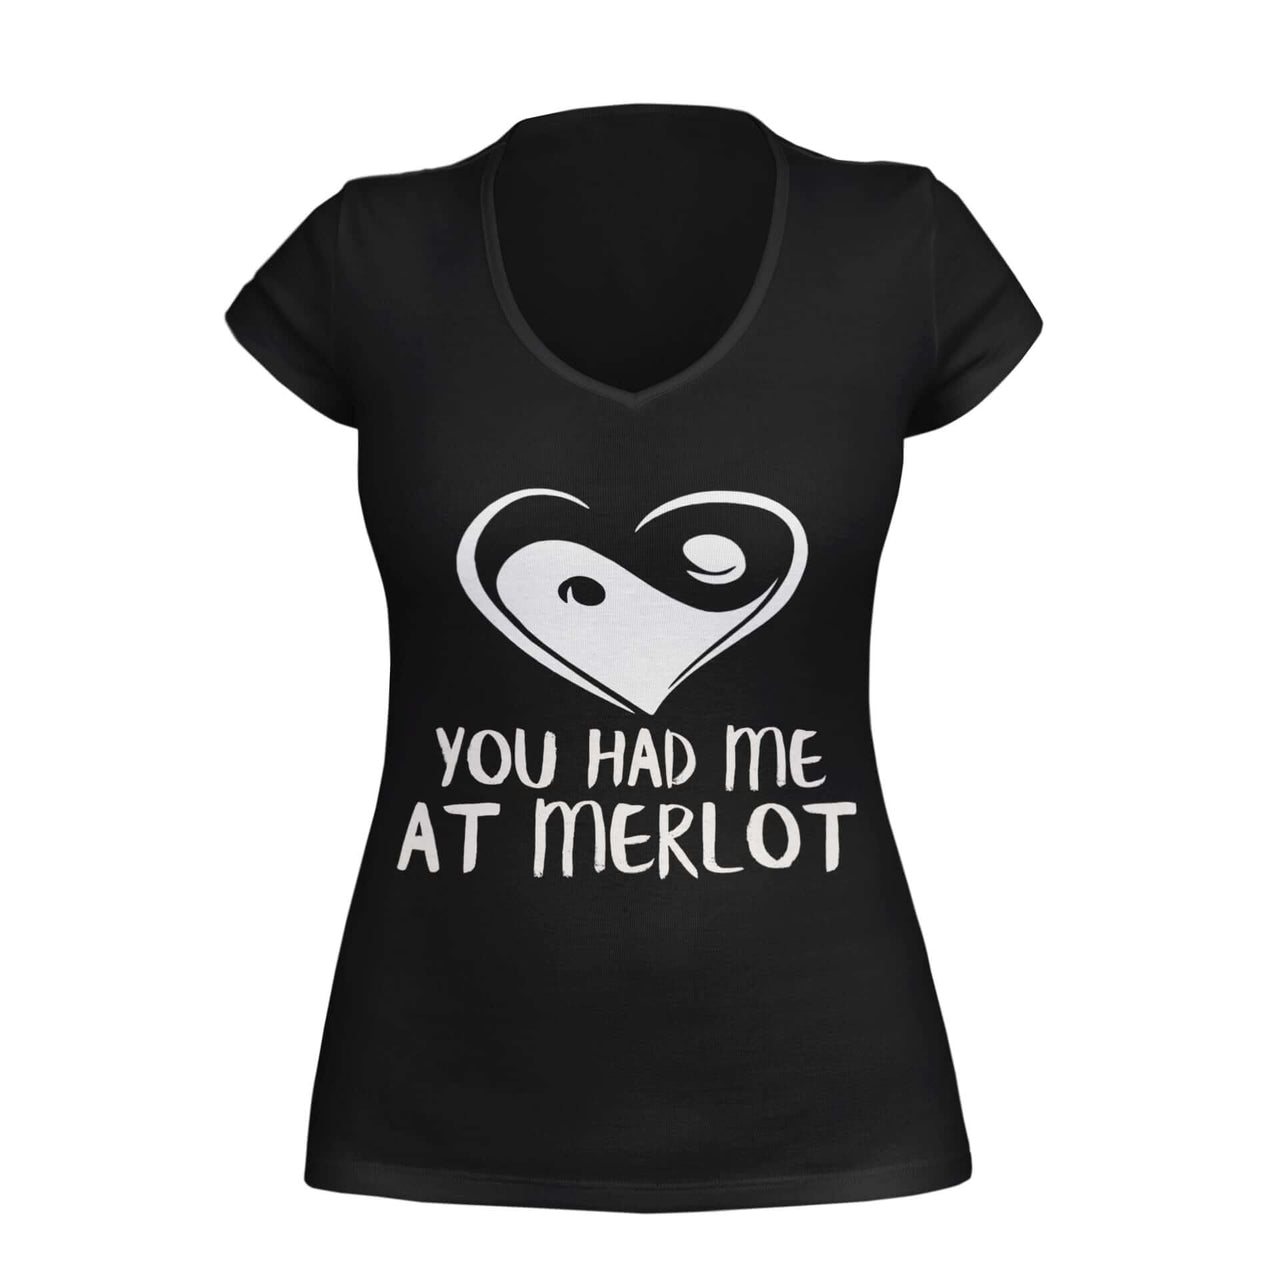 Black VNeck T-Shirt with heart yin yang symbol and text 'you had me at merlot,' designed by WooHoo Apparel."